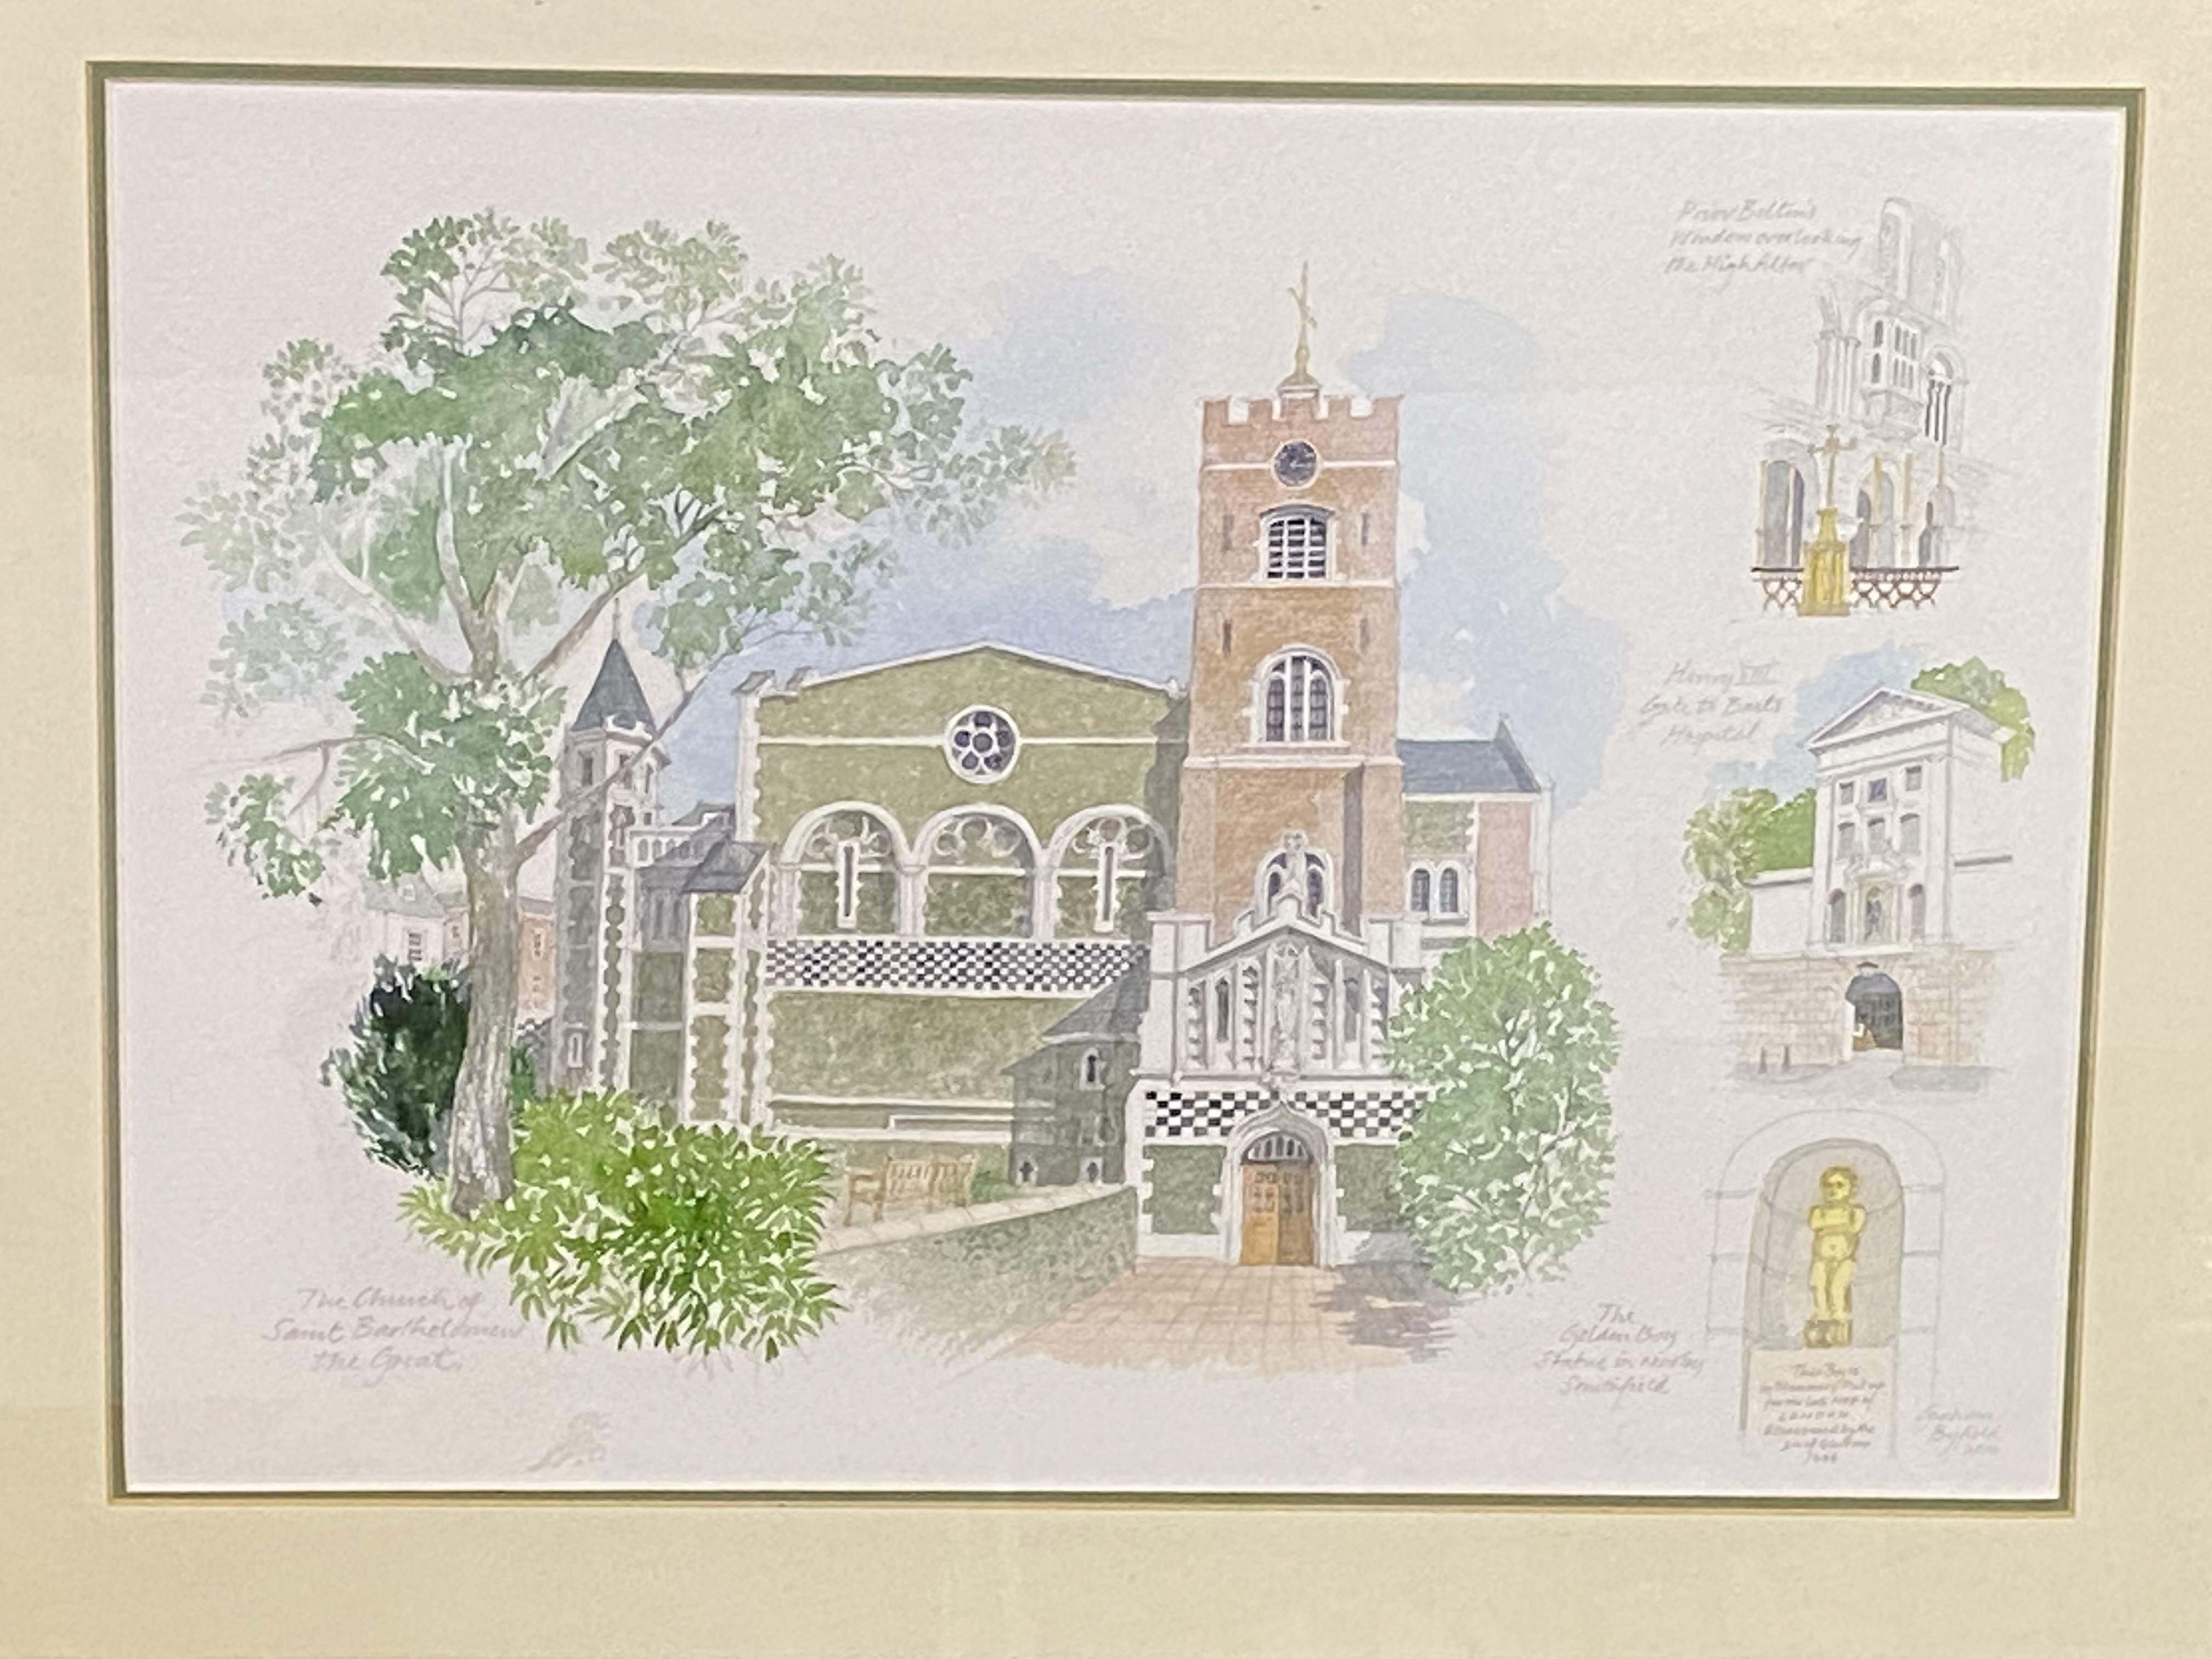 Watercolour of the Church of St. Bartholomew the Great